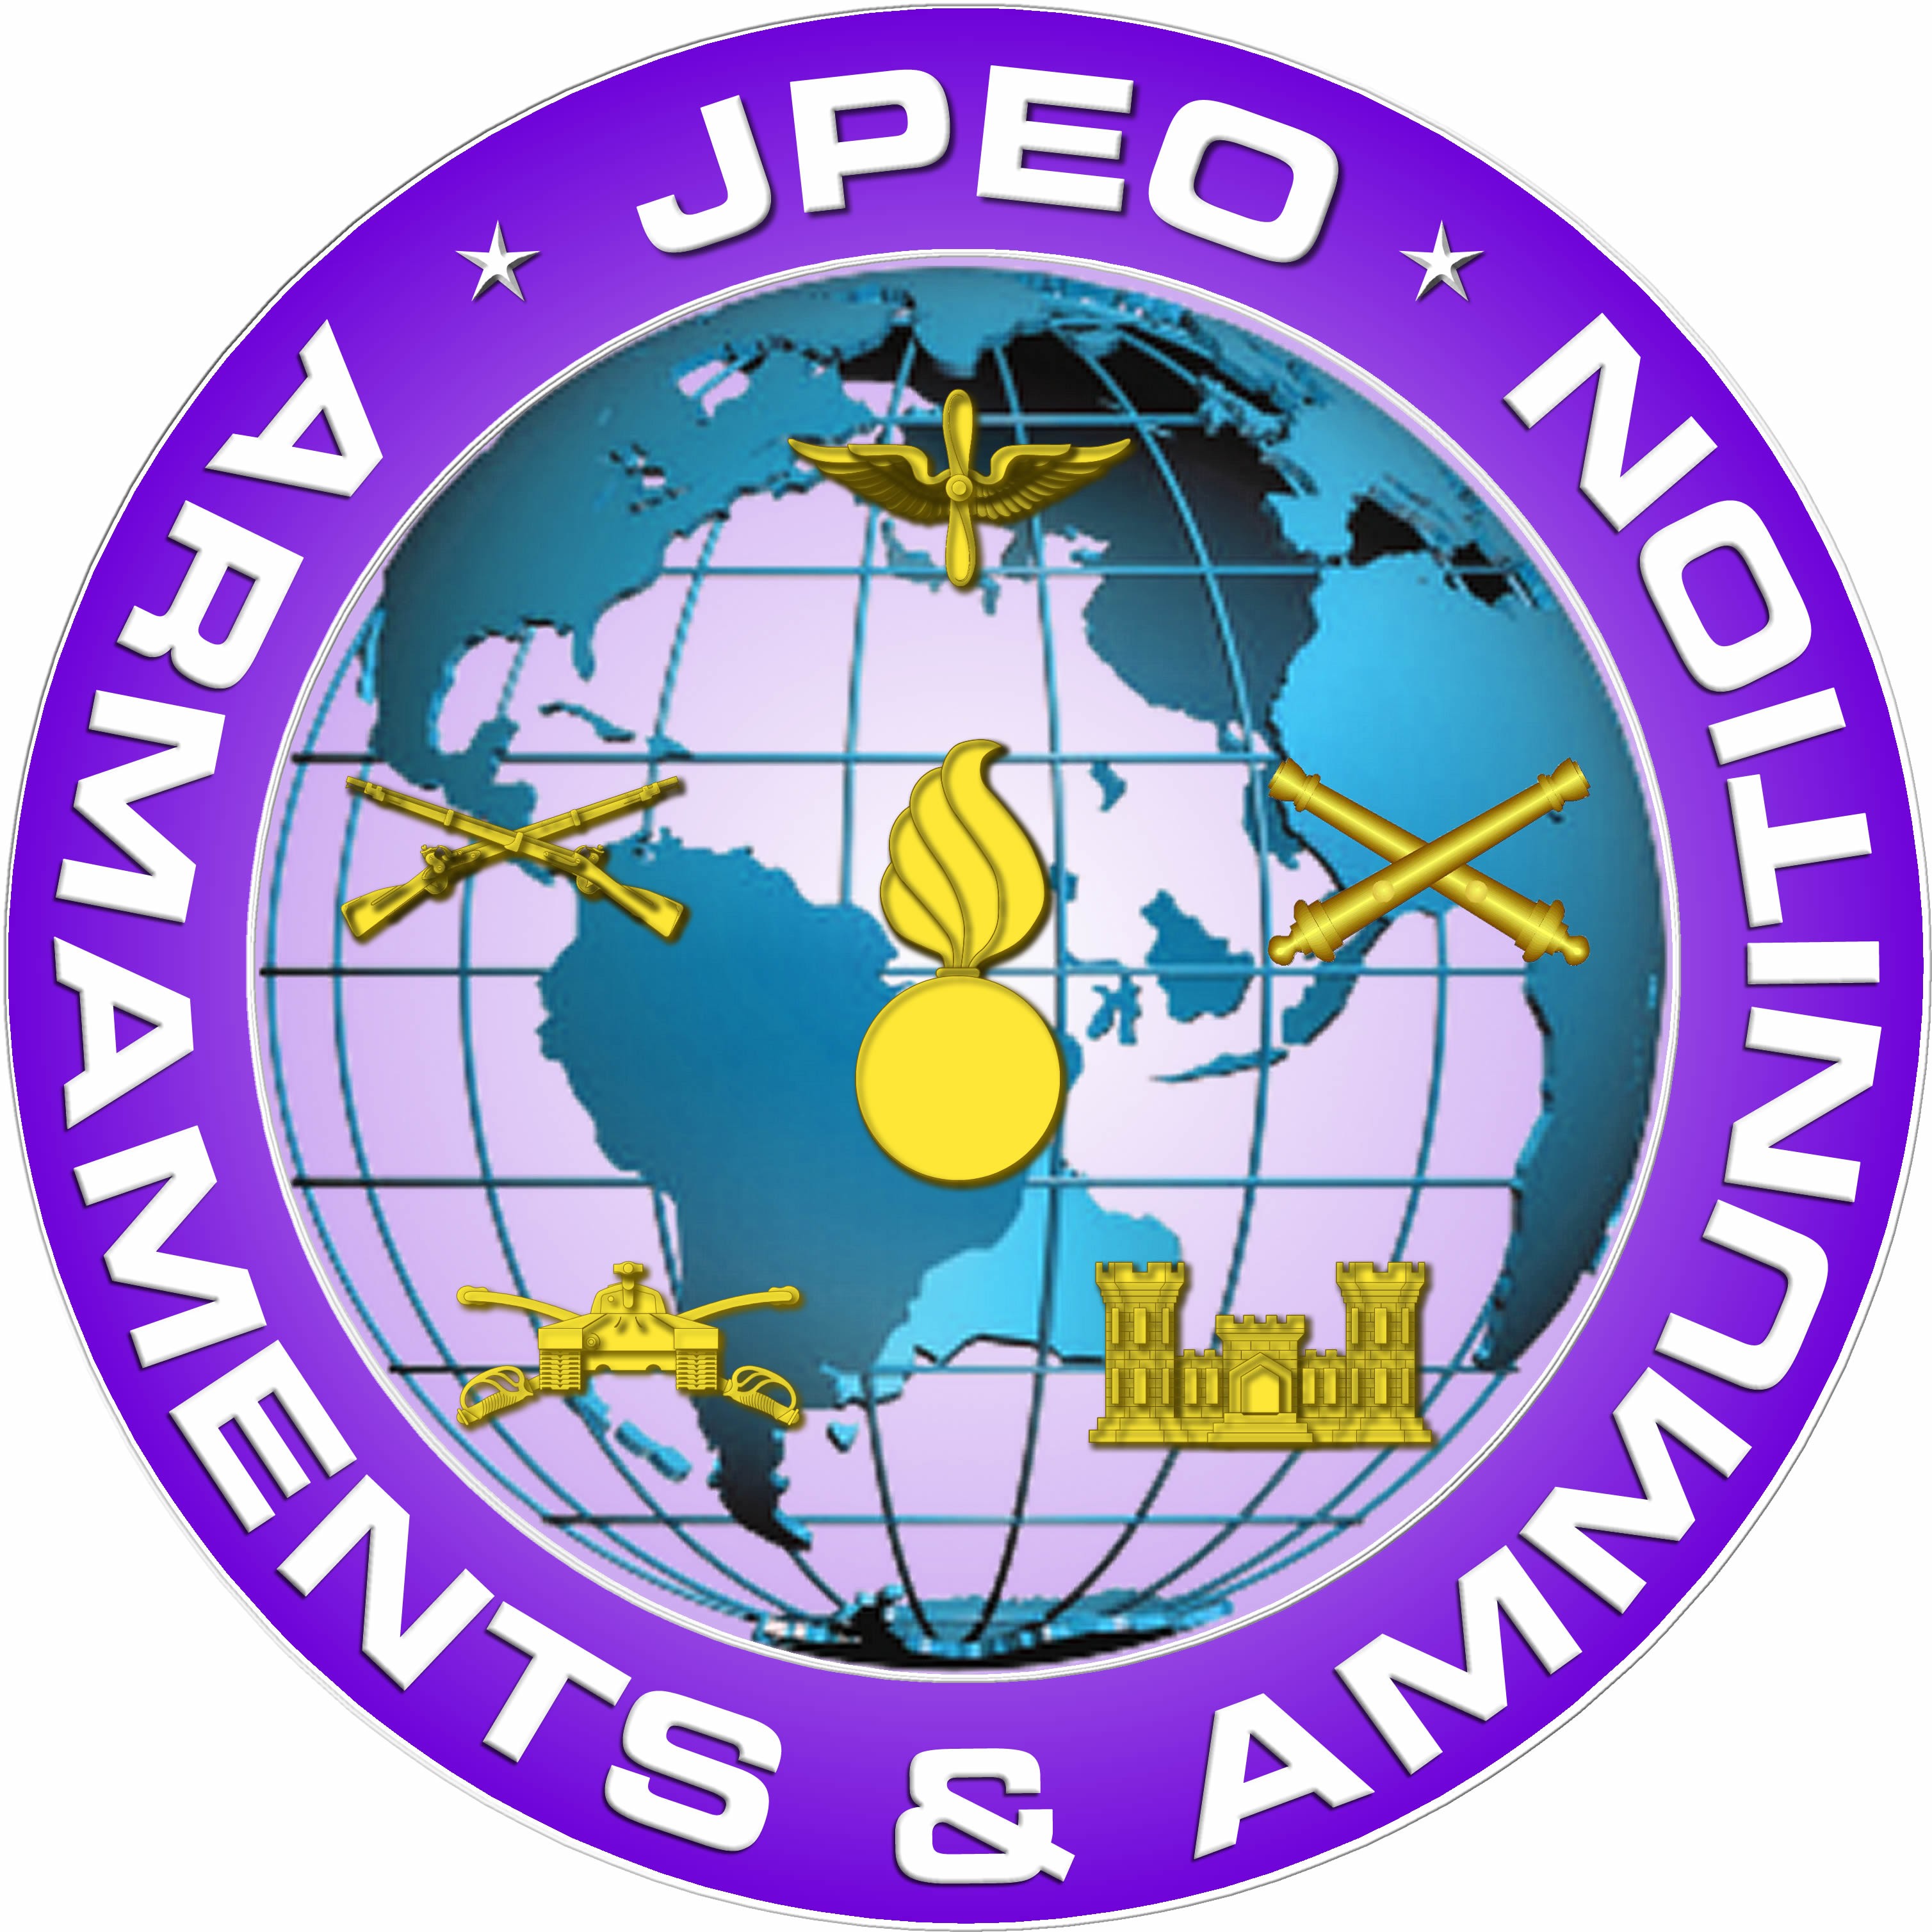 PEO Ammunition to become 'Joint PEO Armaments and Ammunition' | Article ...